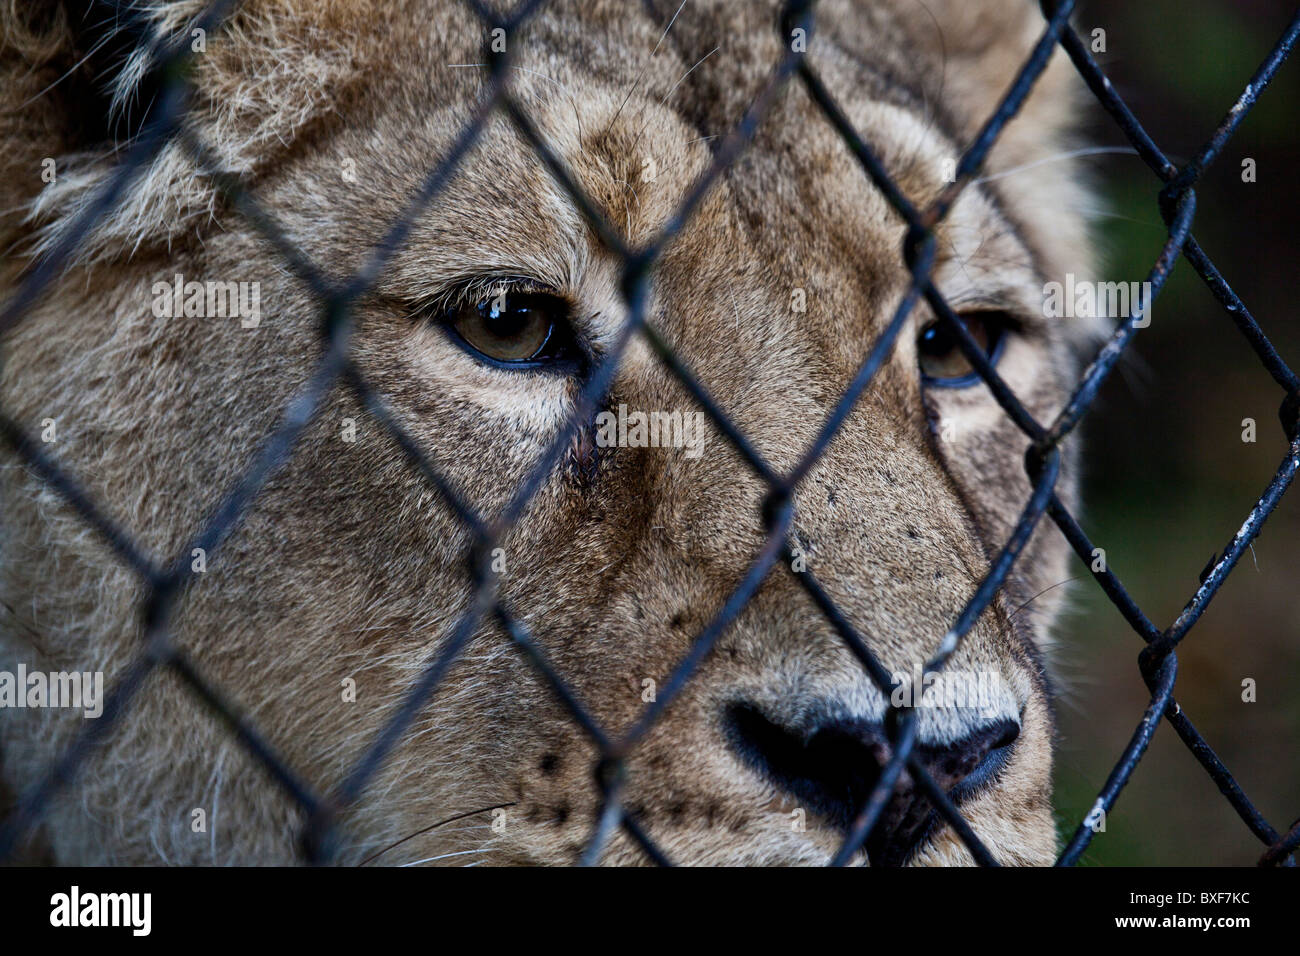 Caged lion Stock Photo